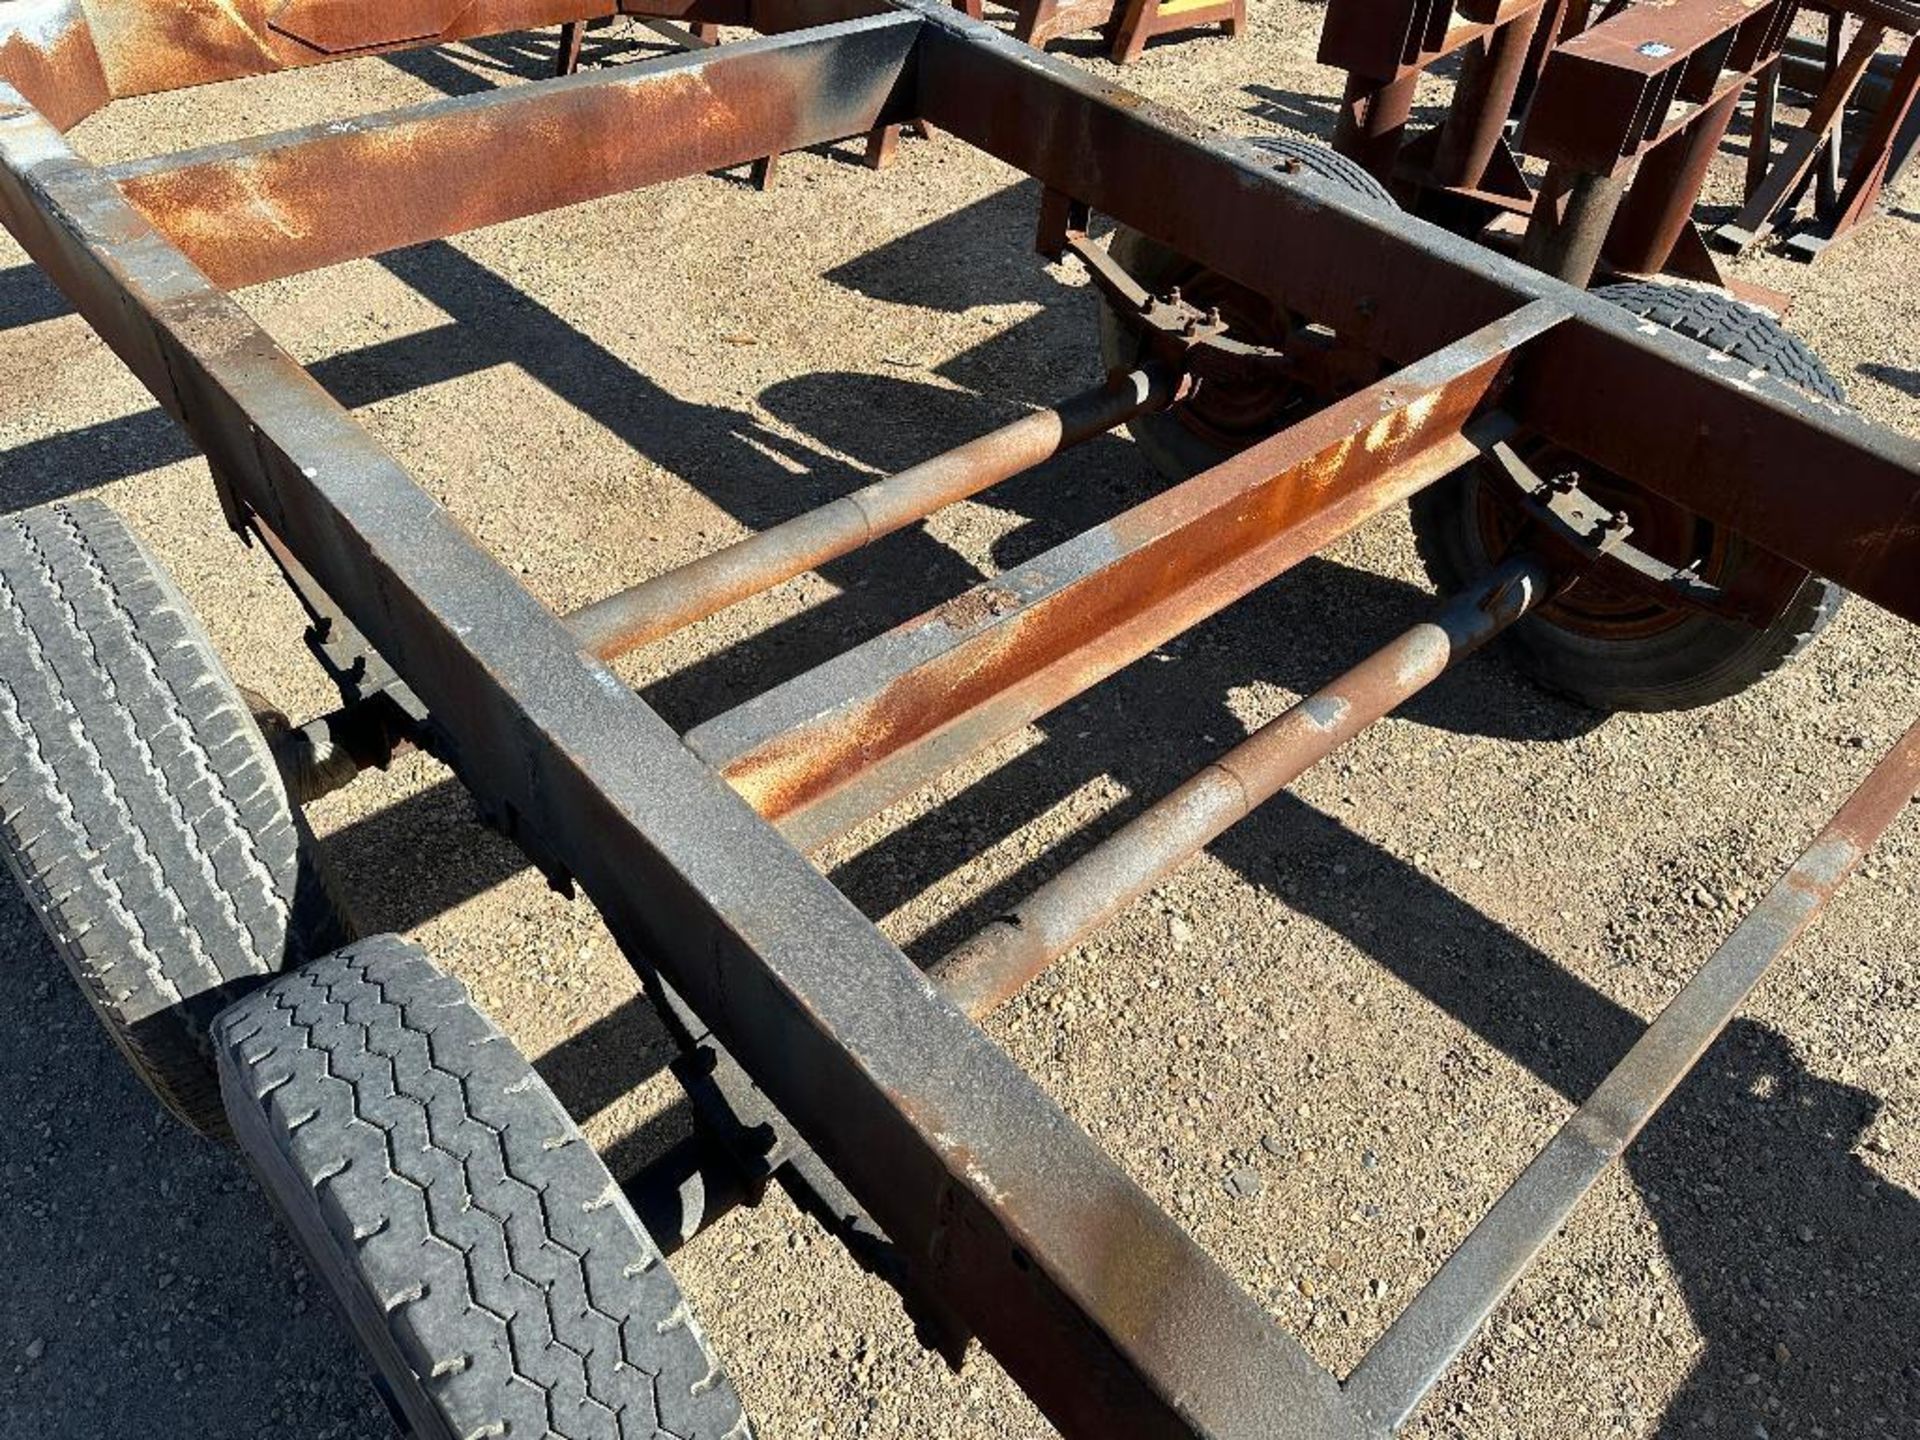 T/A Trailer Frame w/ Pintle Hitch, 14’ x 70” Deck Area, etc. - Image 9 of 9